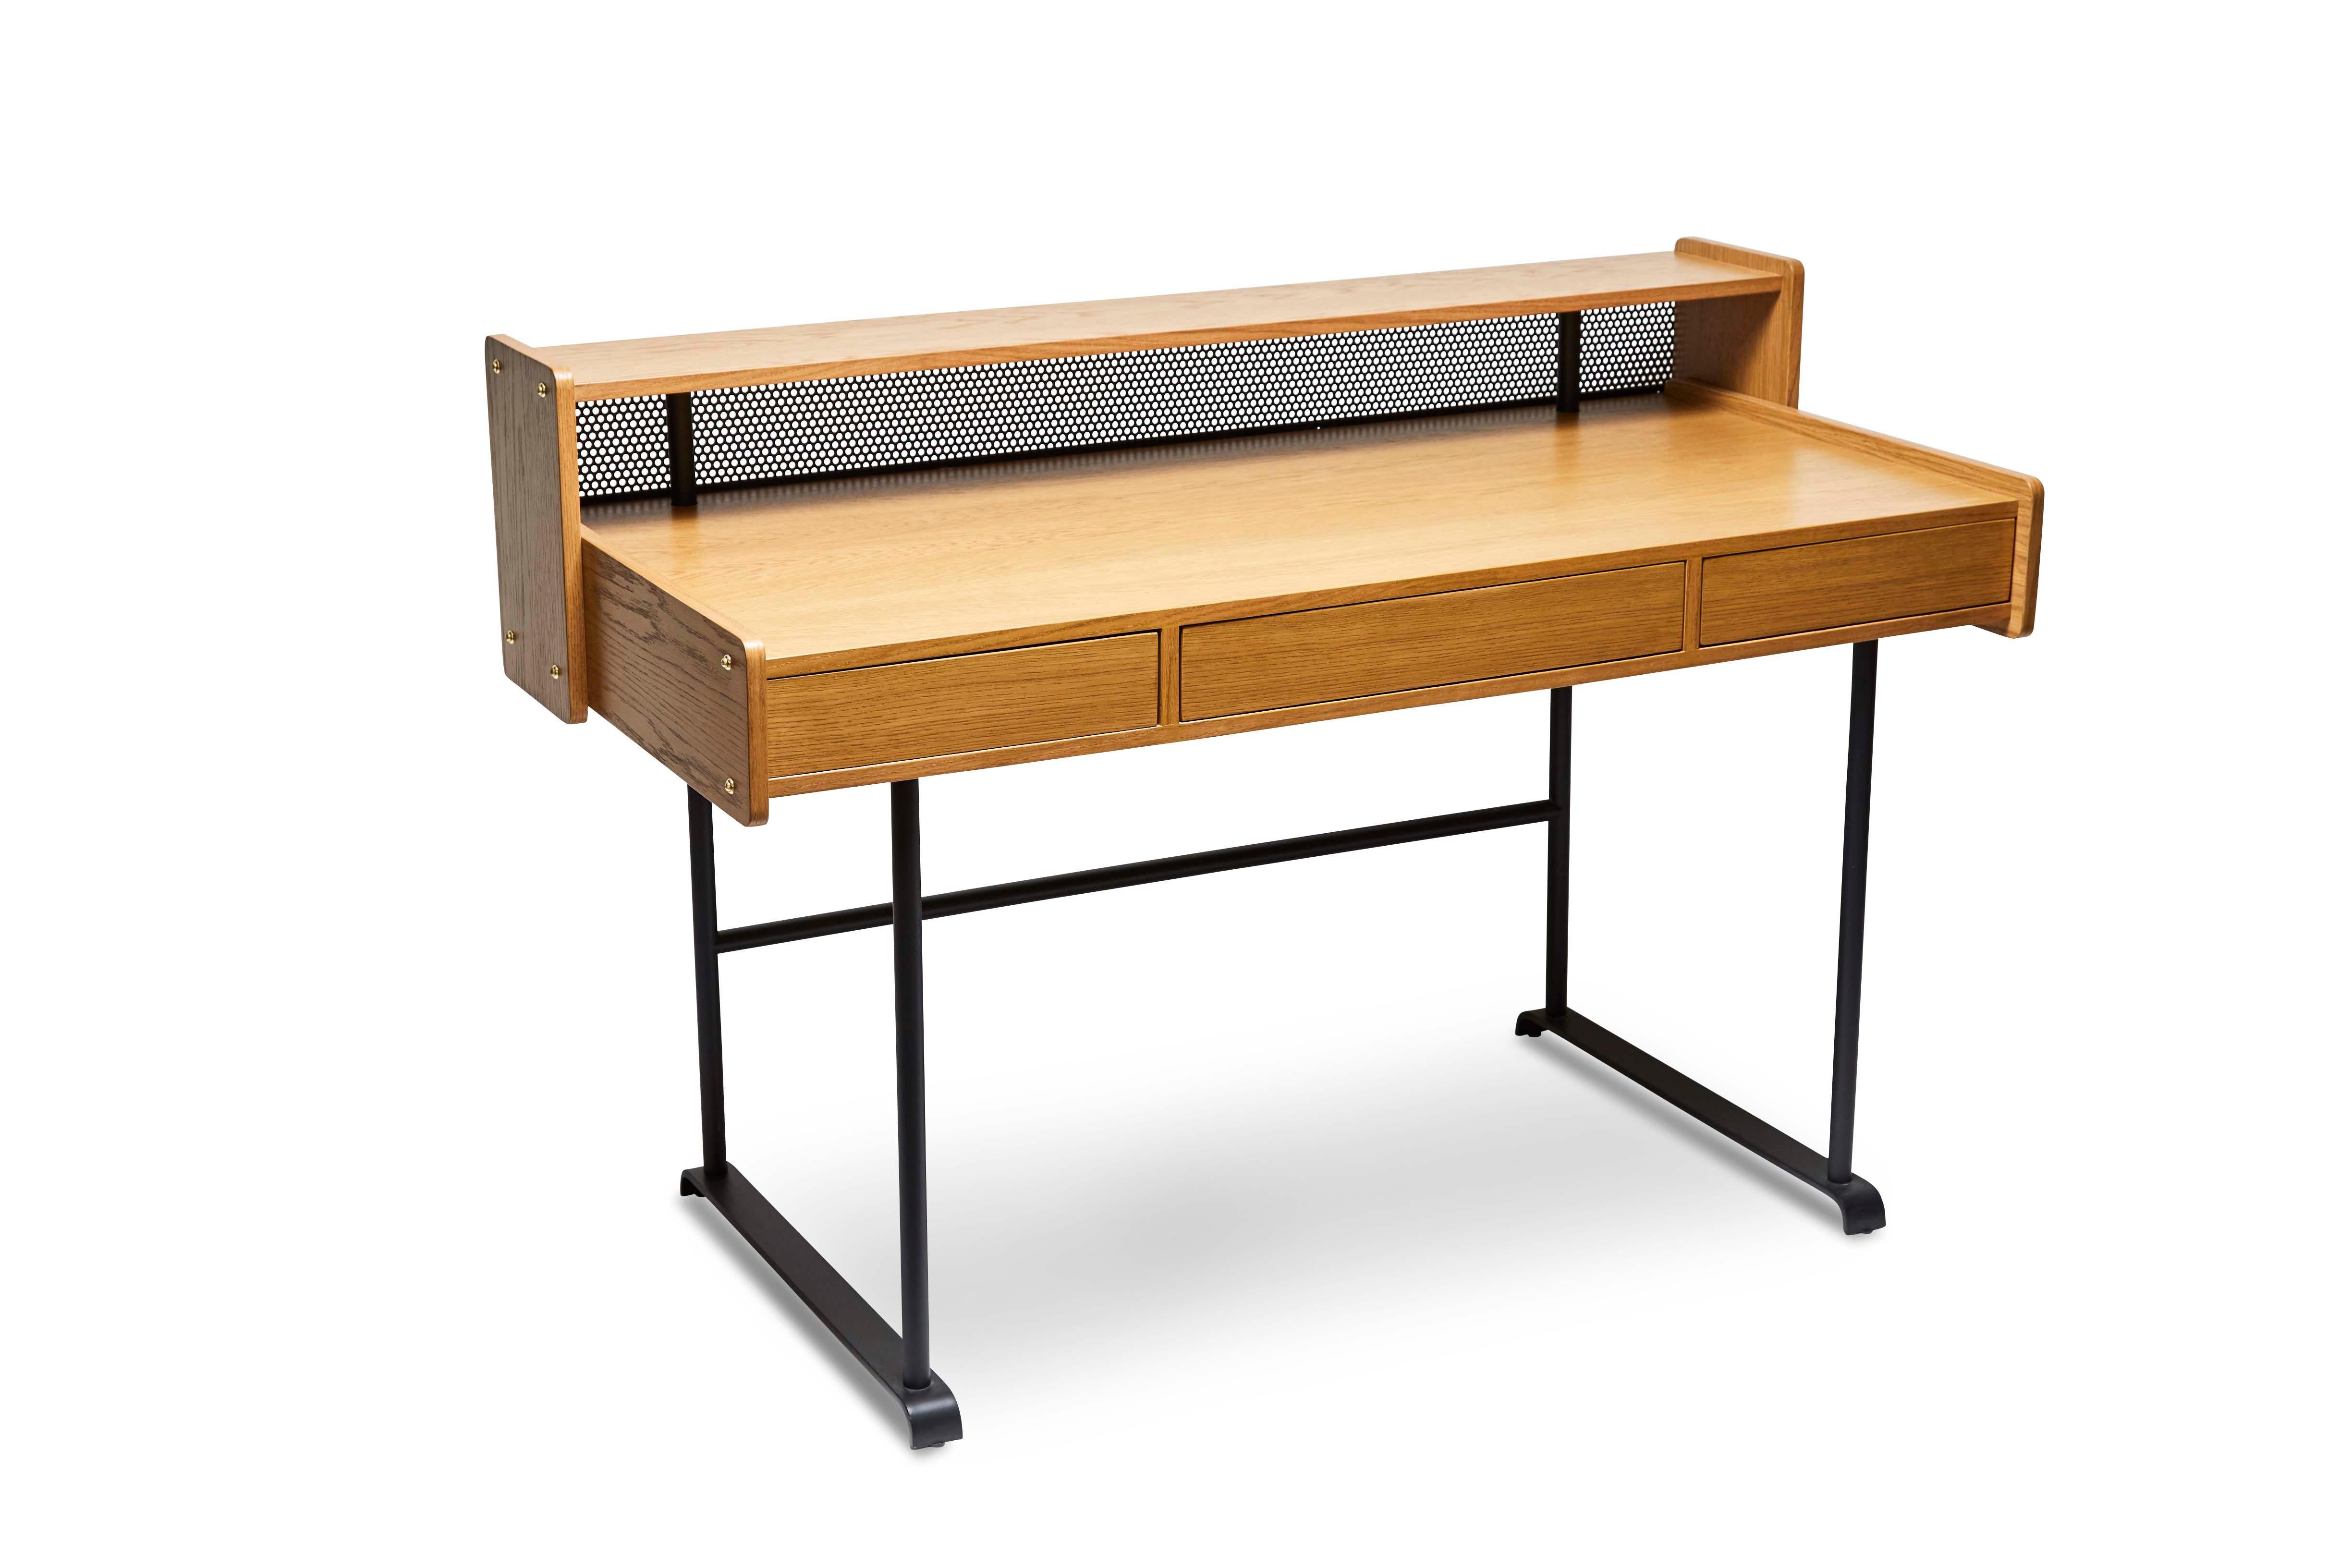 The Maker's desk is made of American walnut or white oak and has three push-to-open drawers. The case rests on a matte black powder-coated base, and features perforated steel detail on the back. 

The Lawson-Fenning Collection is designed and